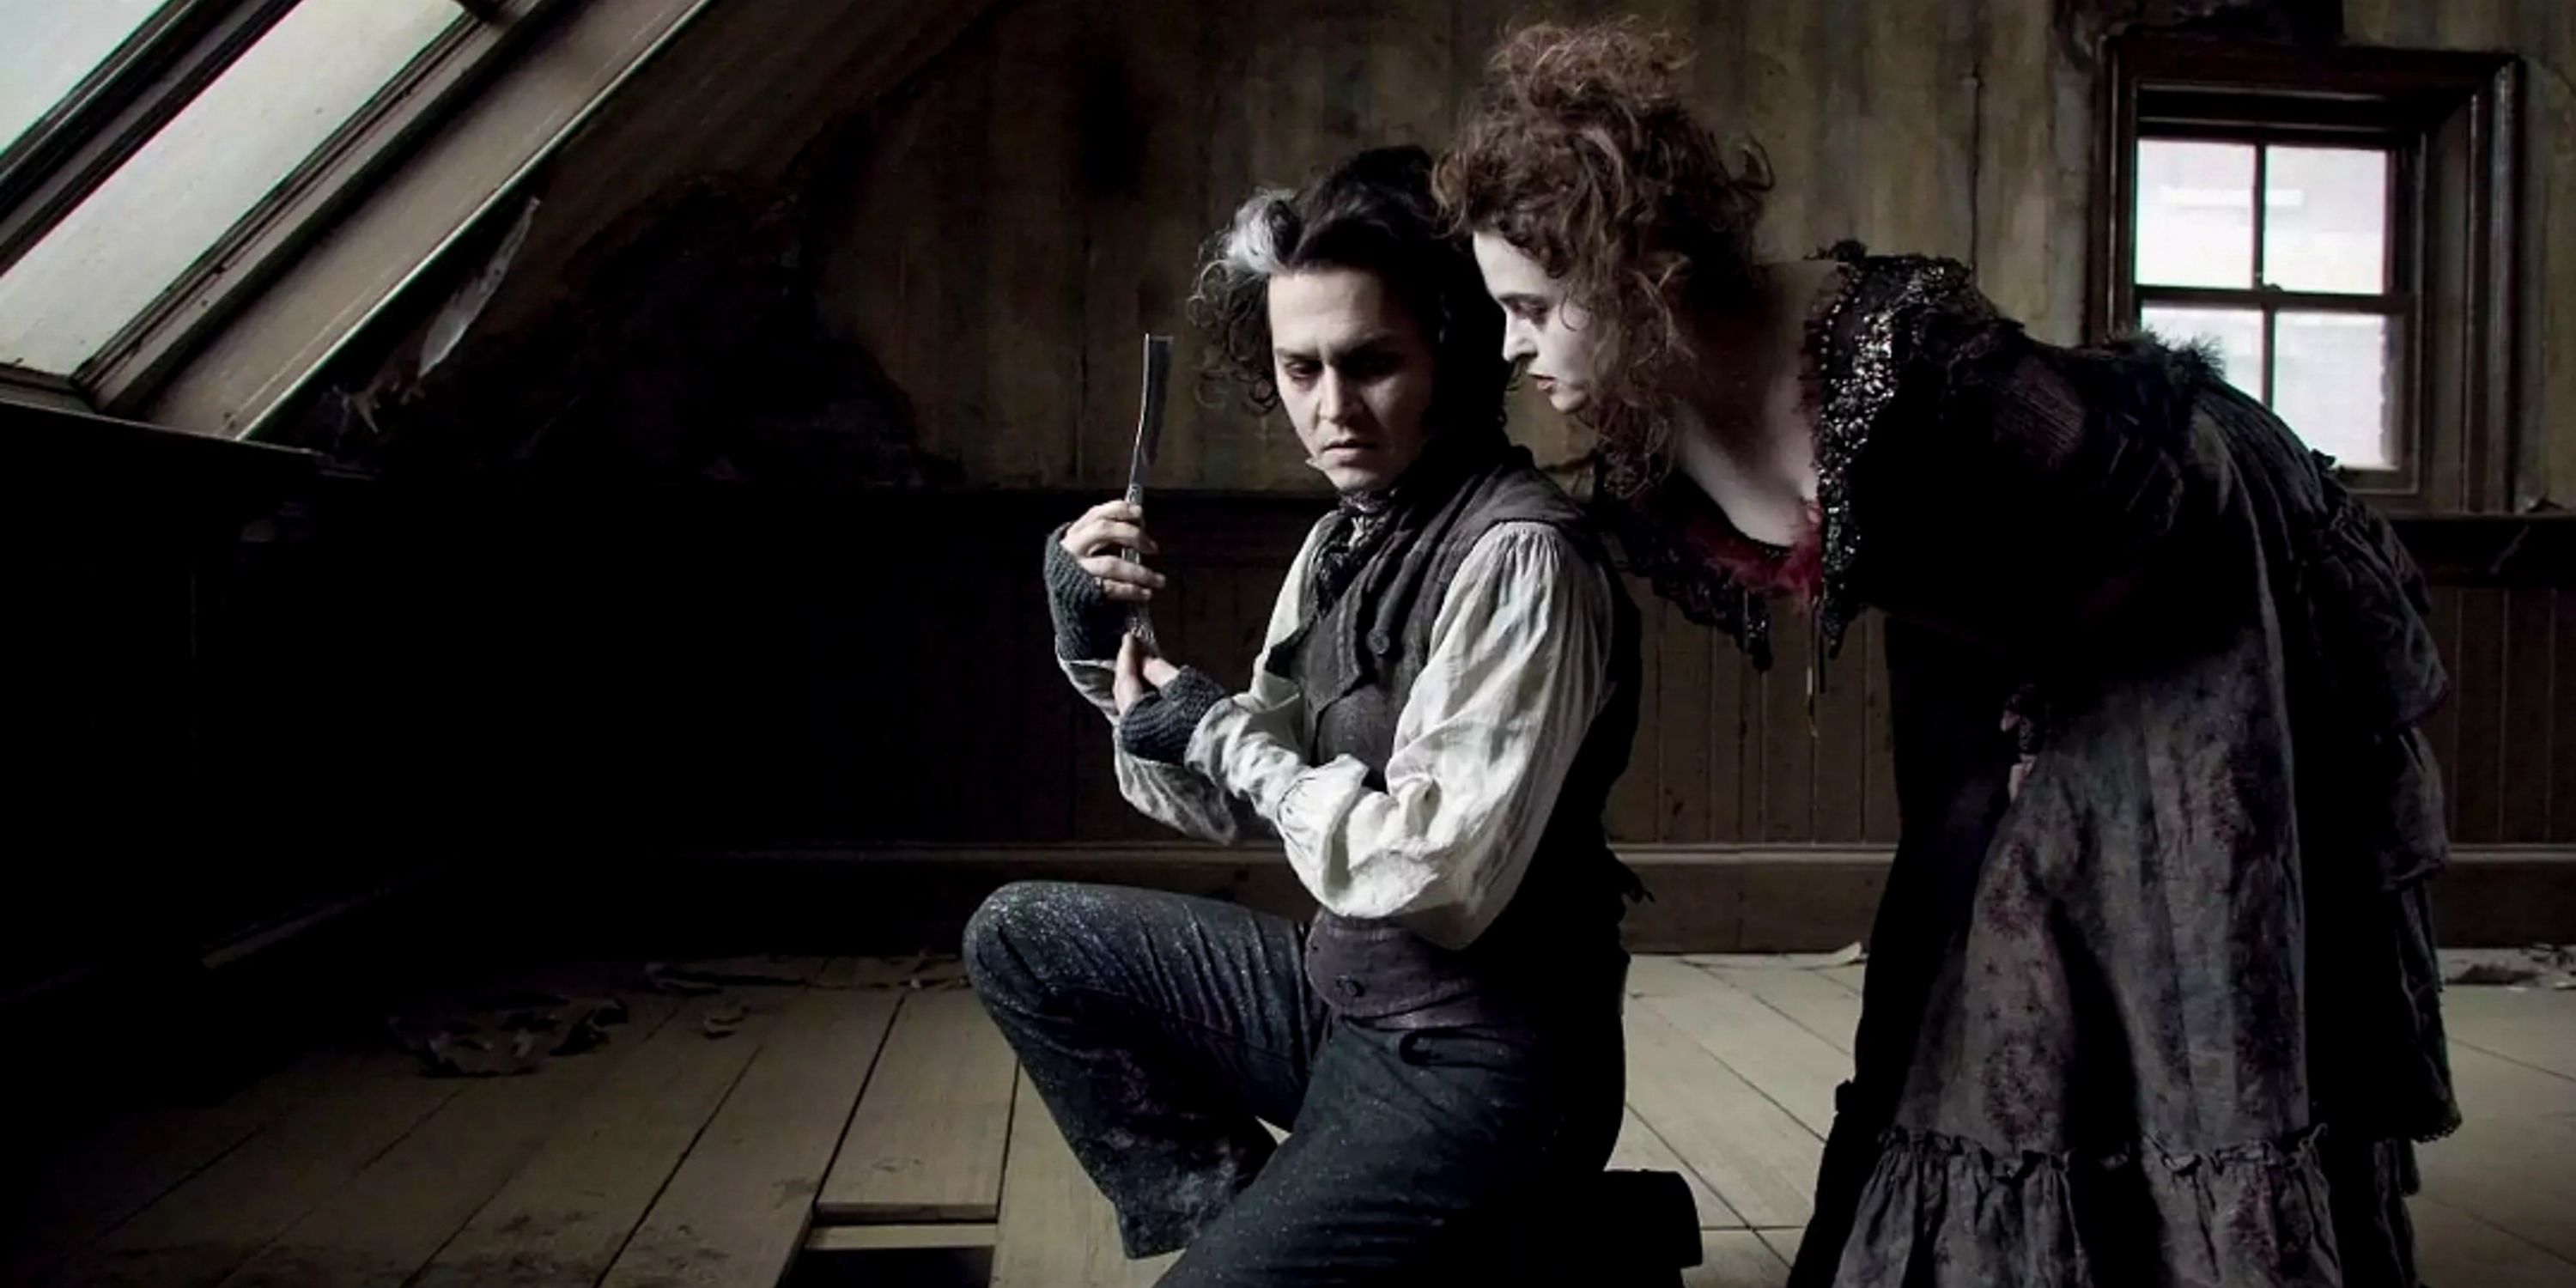 Sweeney todd and nellie by a window light